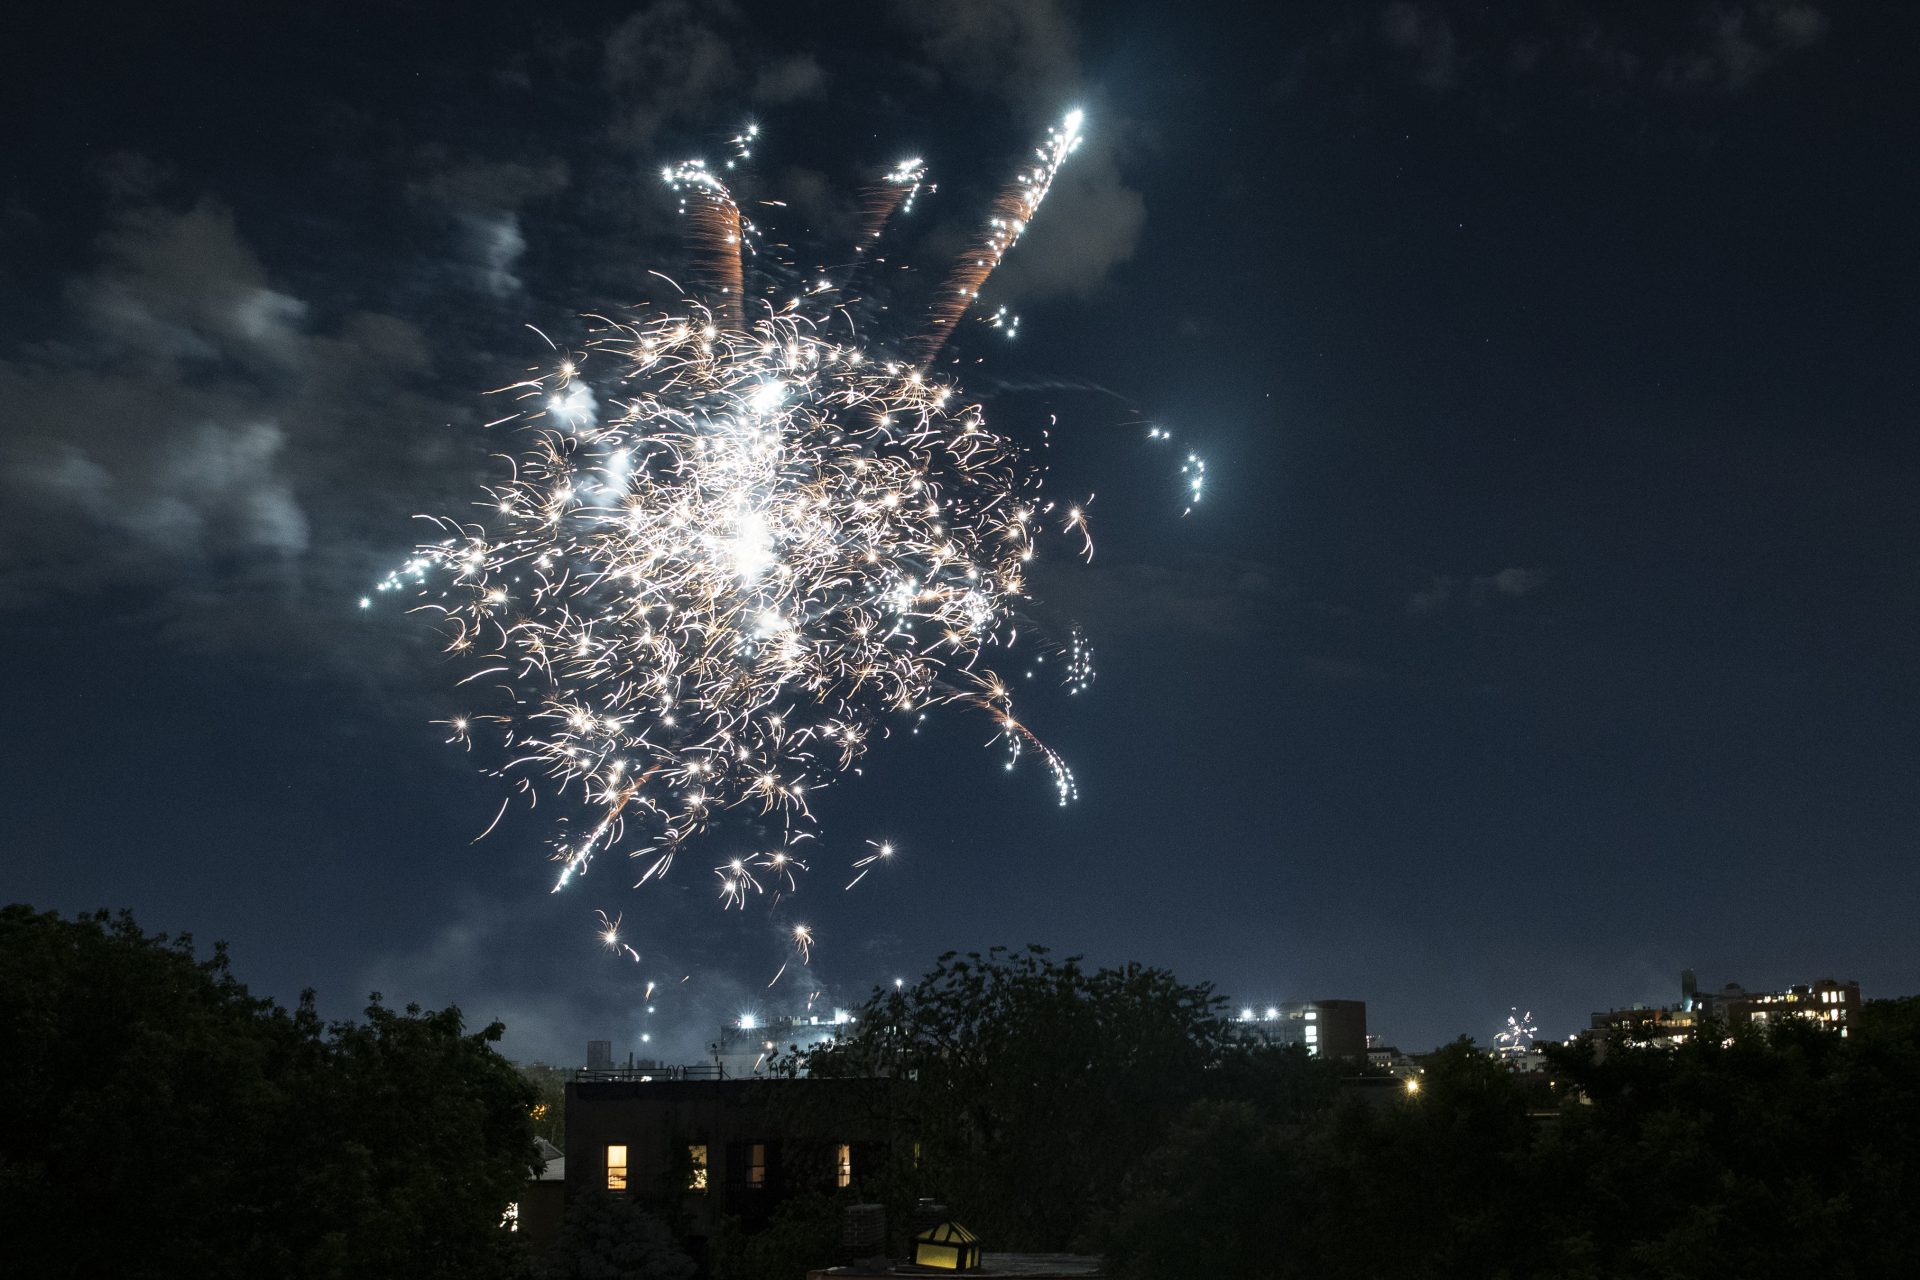 Fireworks explode during Juneteenth celebrations above the Bedford-Stuyvesant neighborhood in the Brooklyn borough of New York, Friday, June 19, 2020.